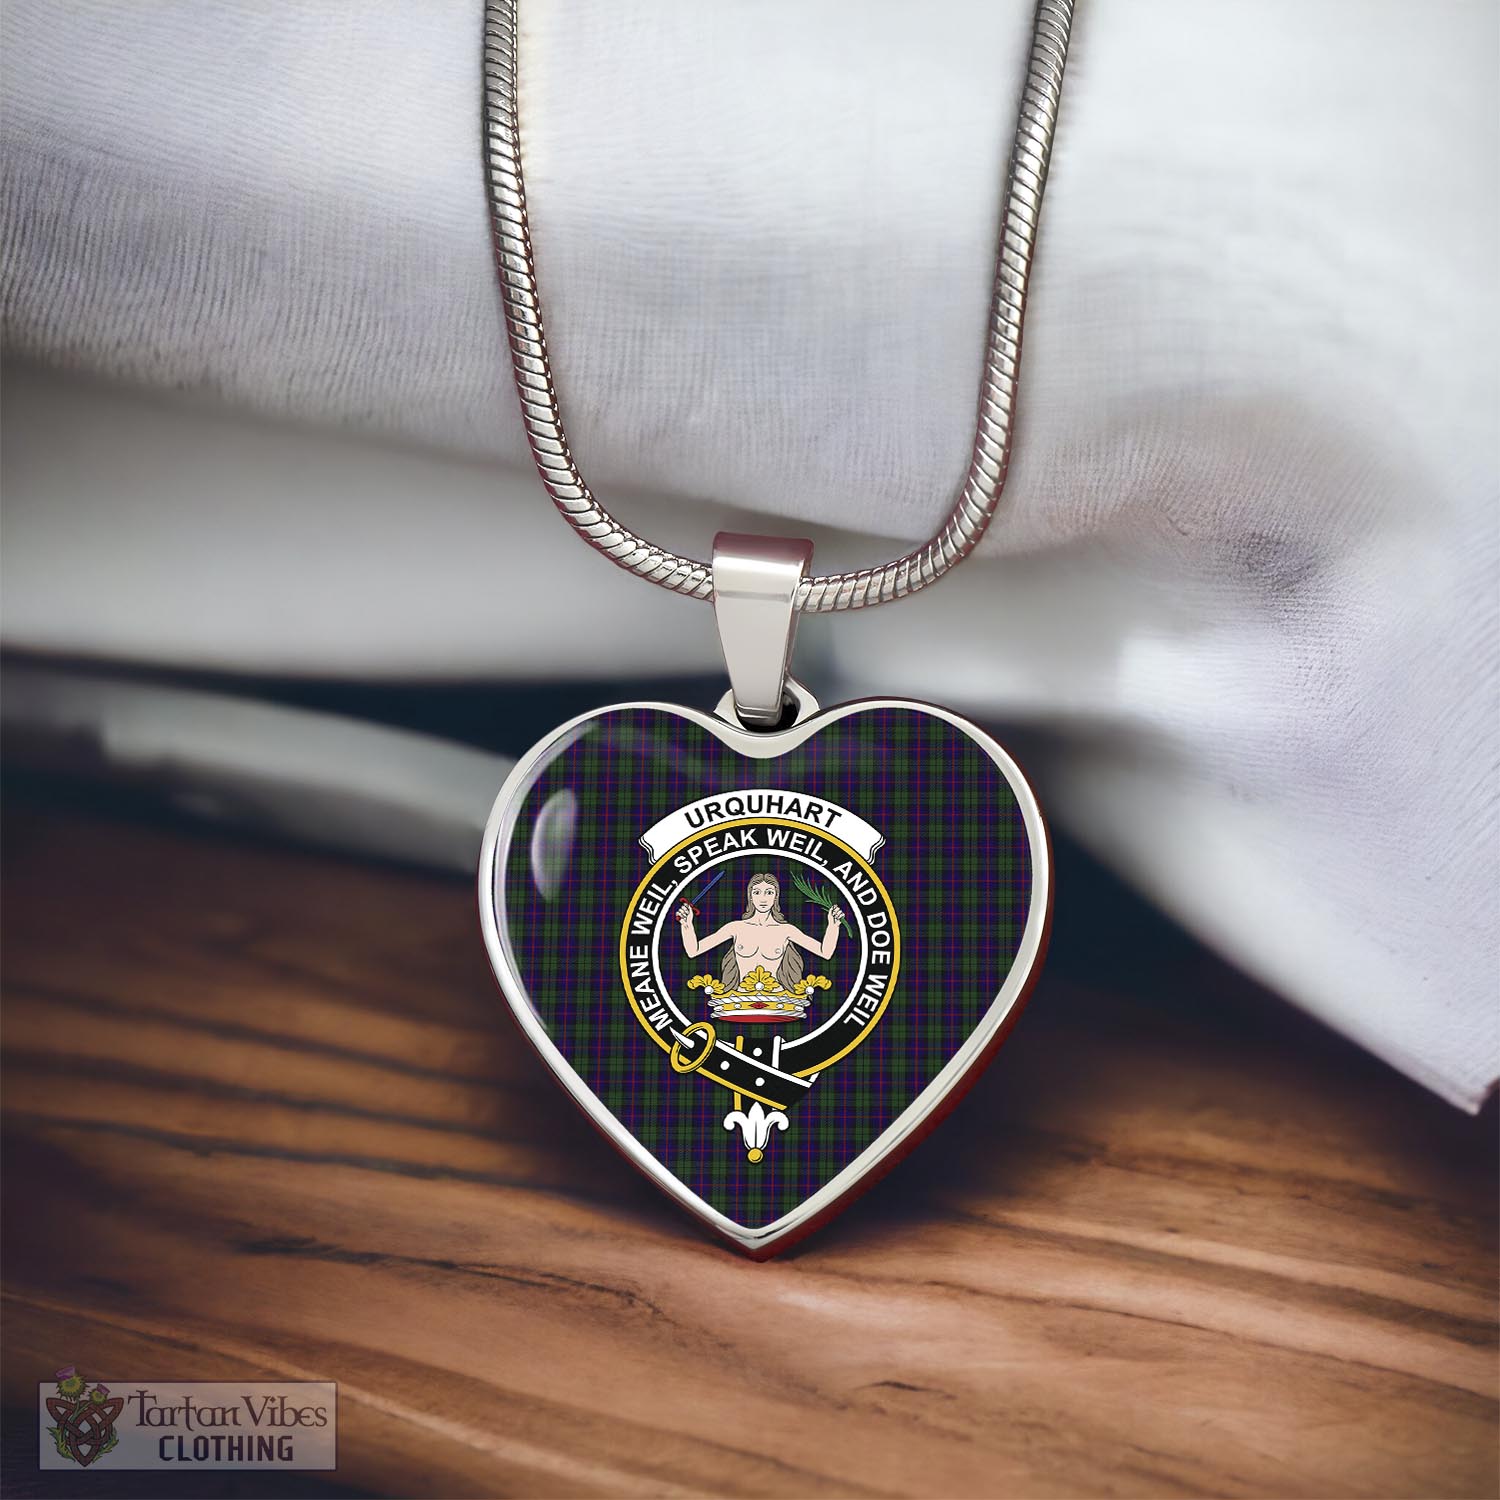 Tartan Vibes Clothing Urquhart Tartan Heart Necklace with Family Crest